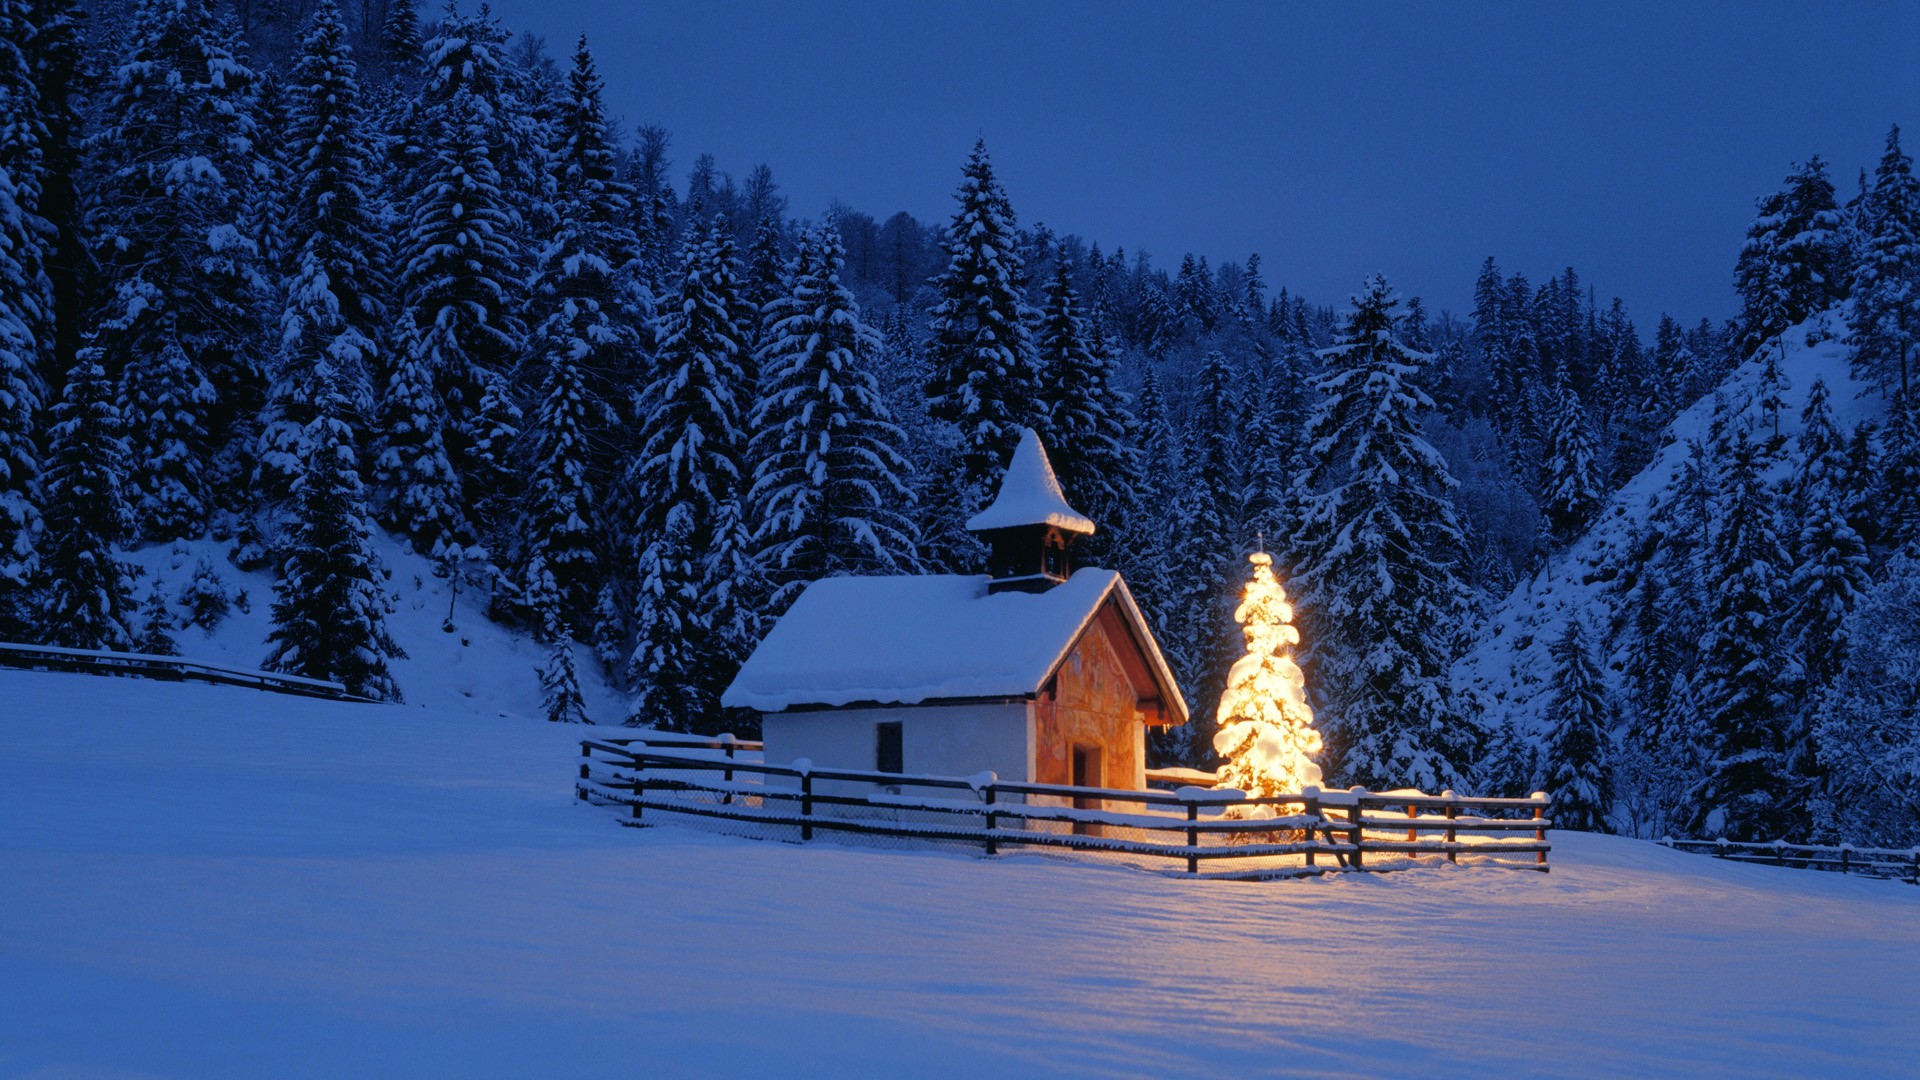 Wallpaper Which Is Under The Winter Category Of HD